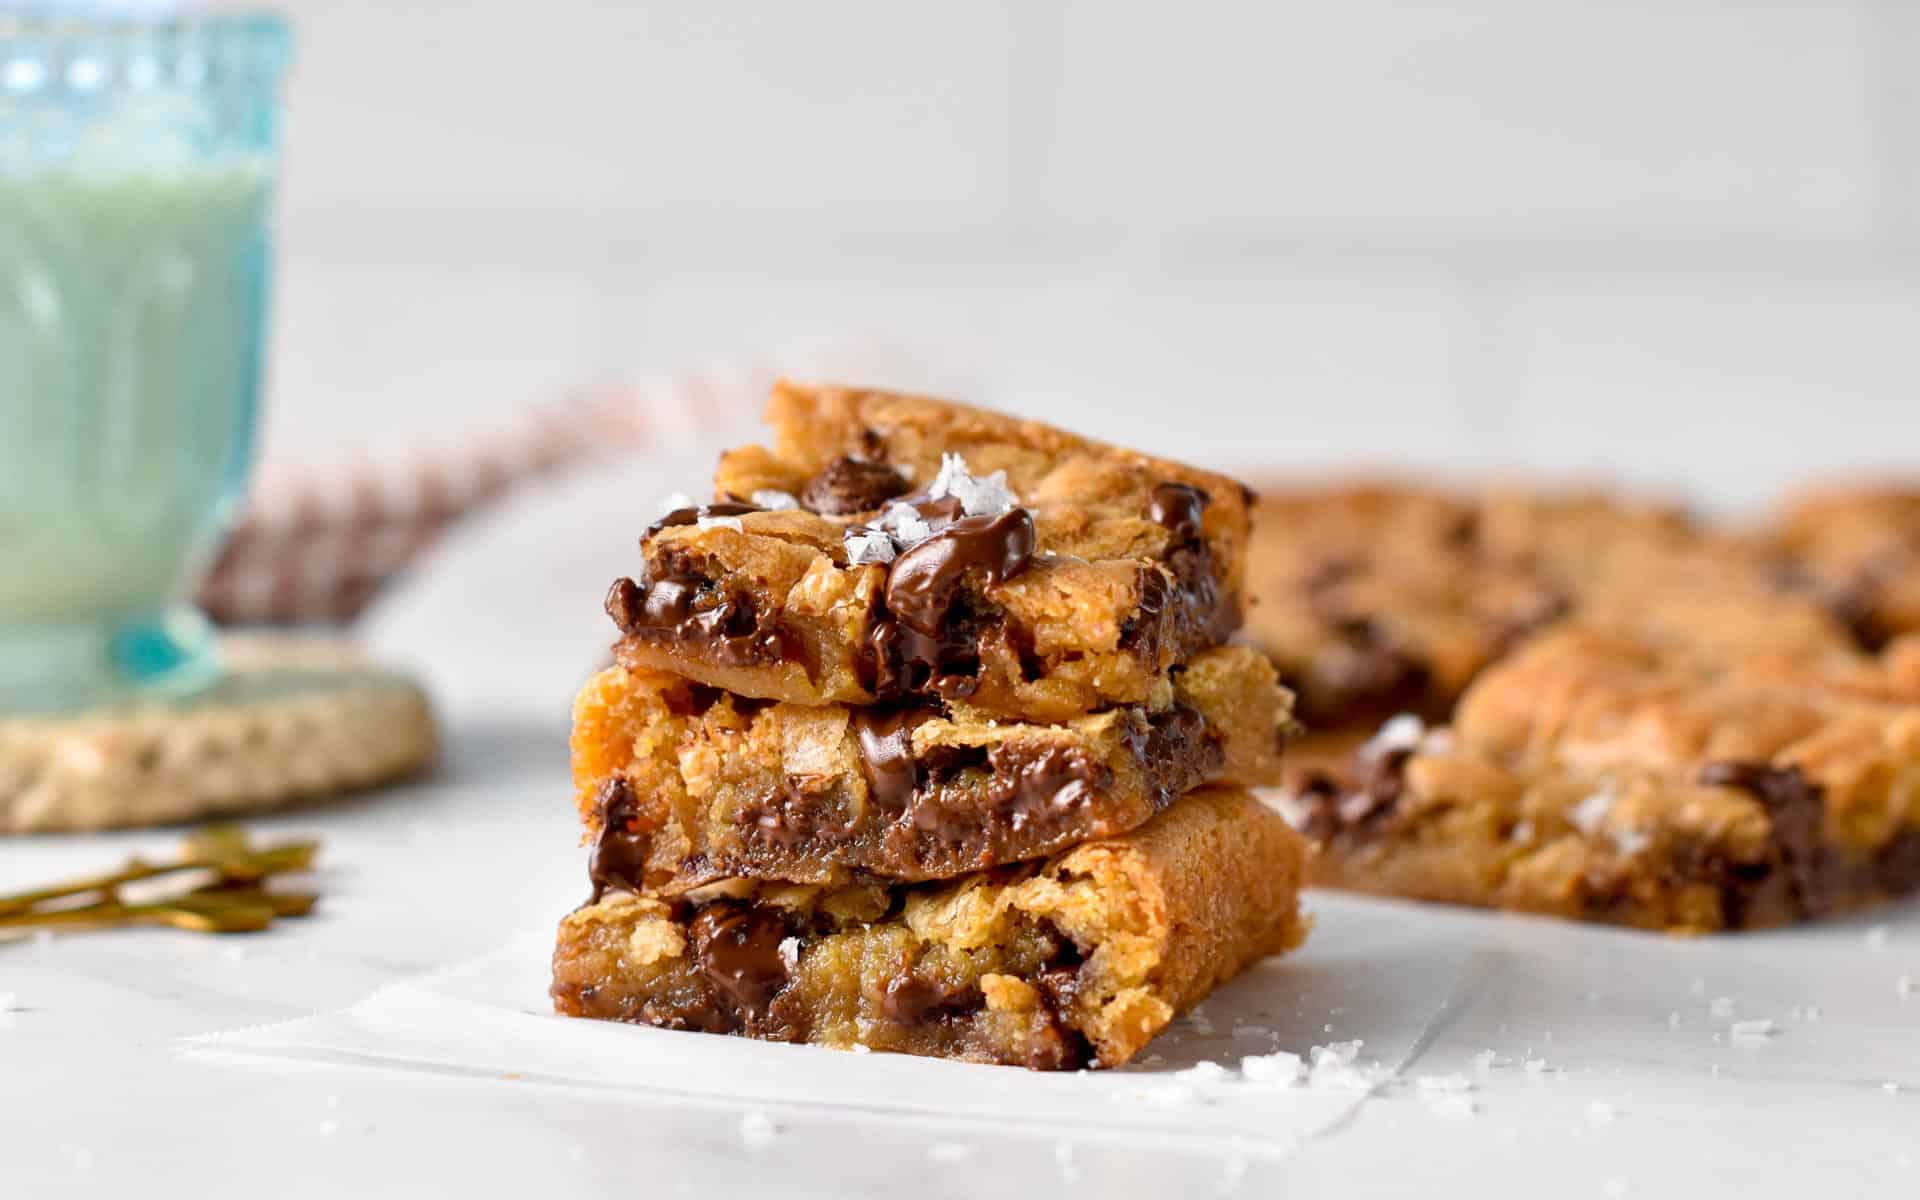 These vegan blondies are chewy, gooey vanilla bars filled with chocolate chips and crispy edges. Plus these vegan blondies are also nut-free and easy to make gluten-free if desired.These vegan blondies are chewy, gooey vanilla bars filled with chocolate chips and crispy edges. Plus these vegan blondies are also nut-free and easy to make gluten-free if desired.